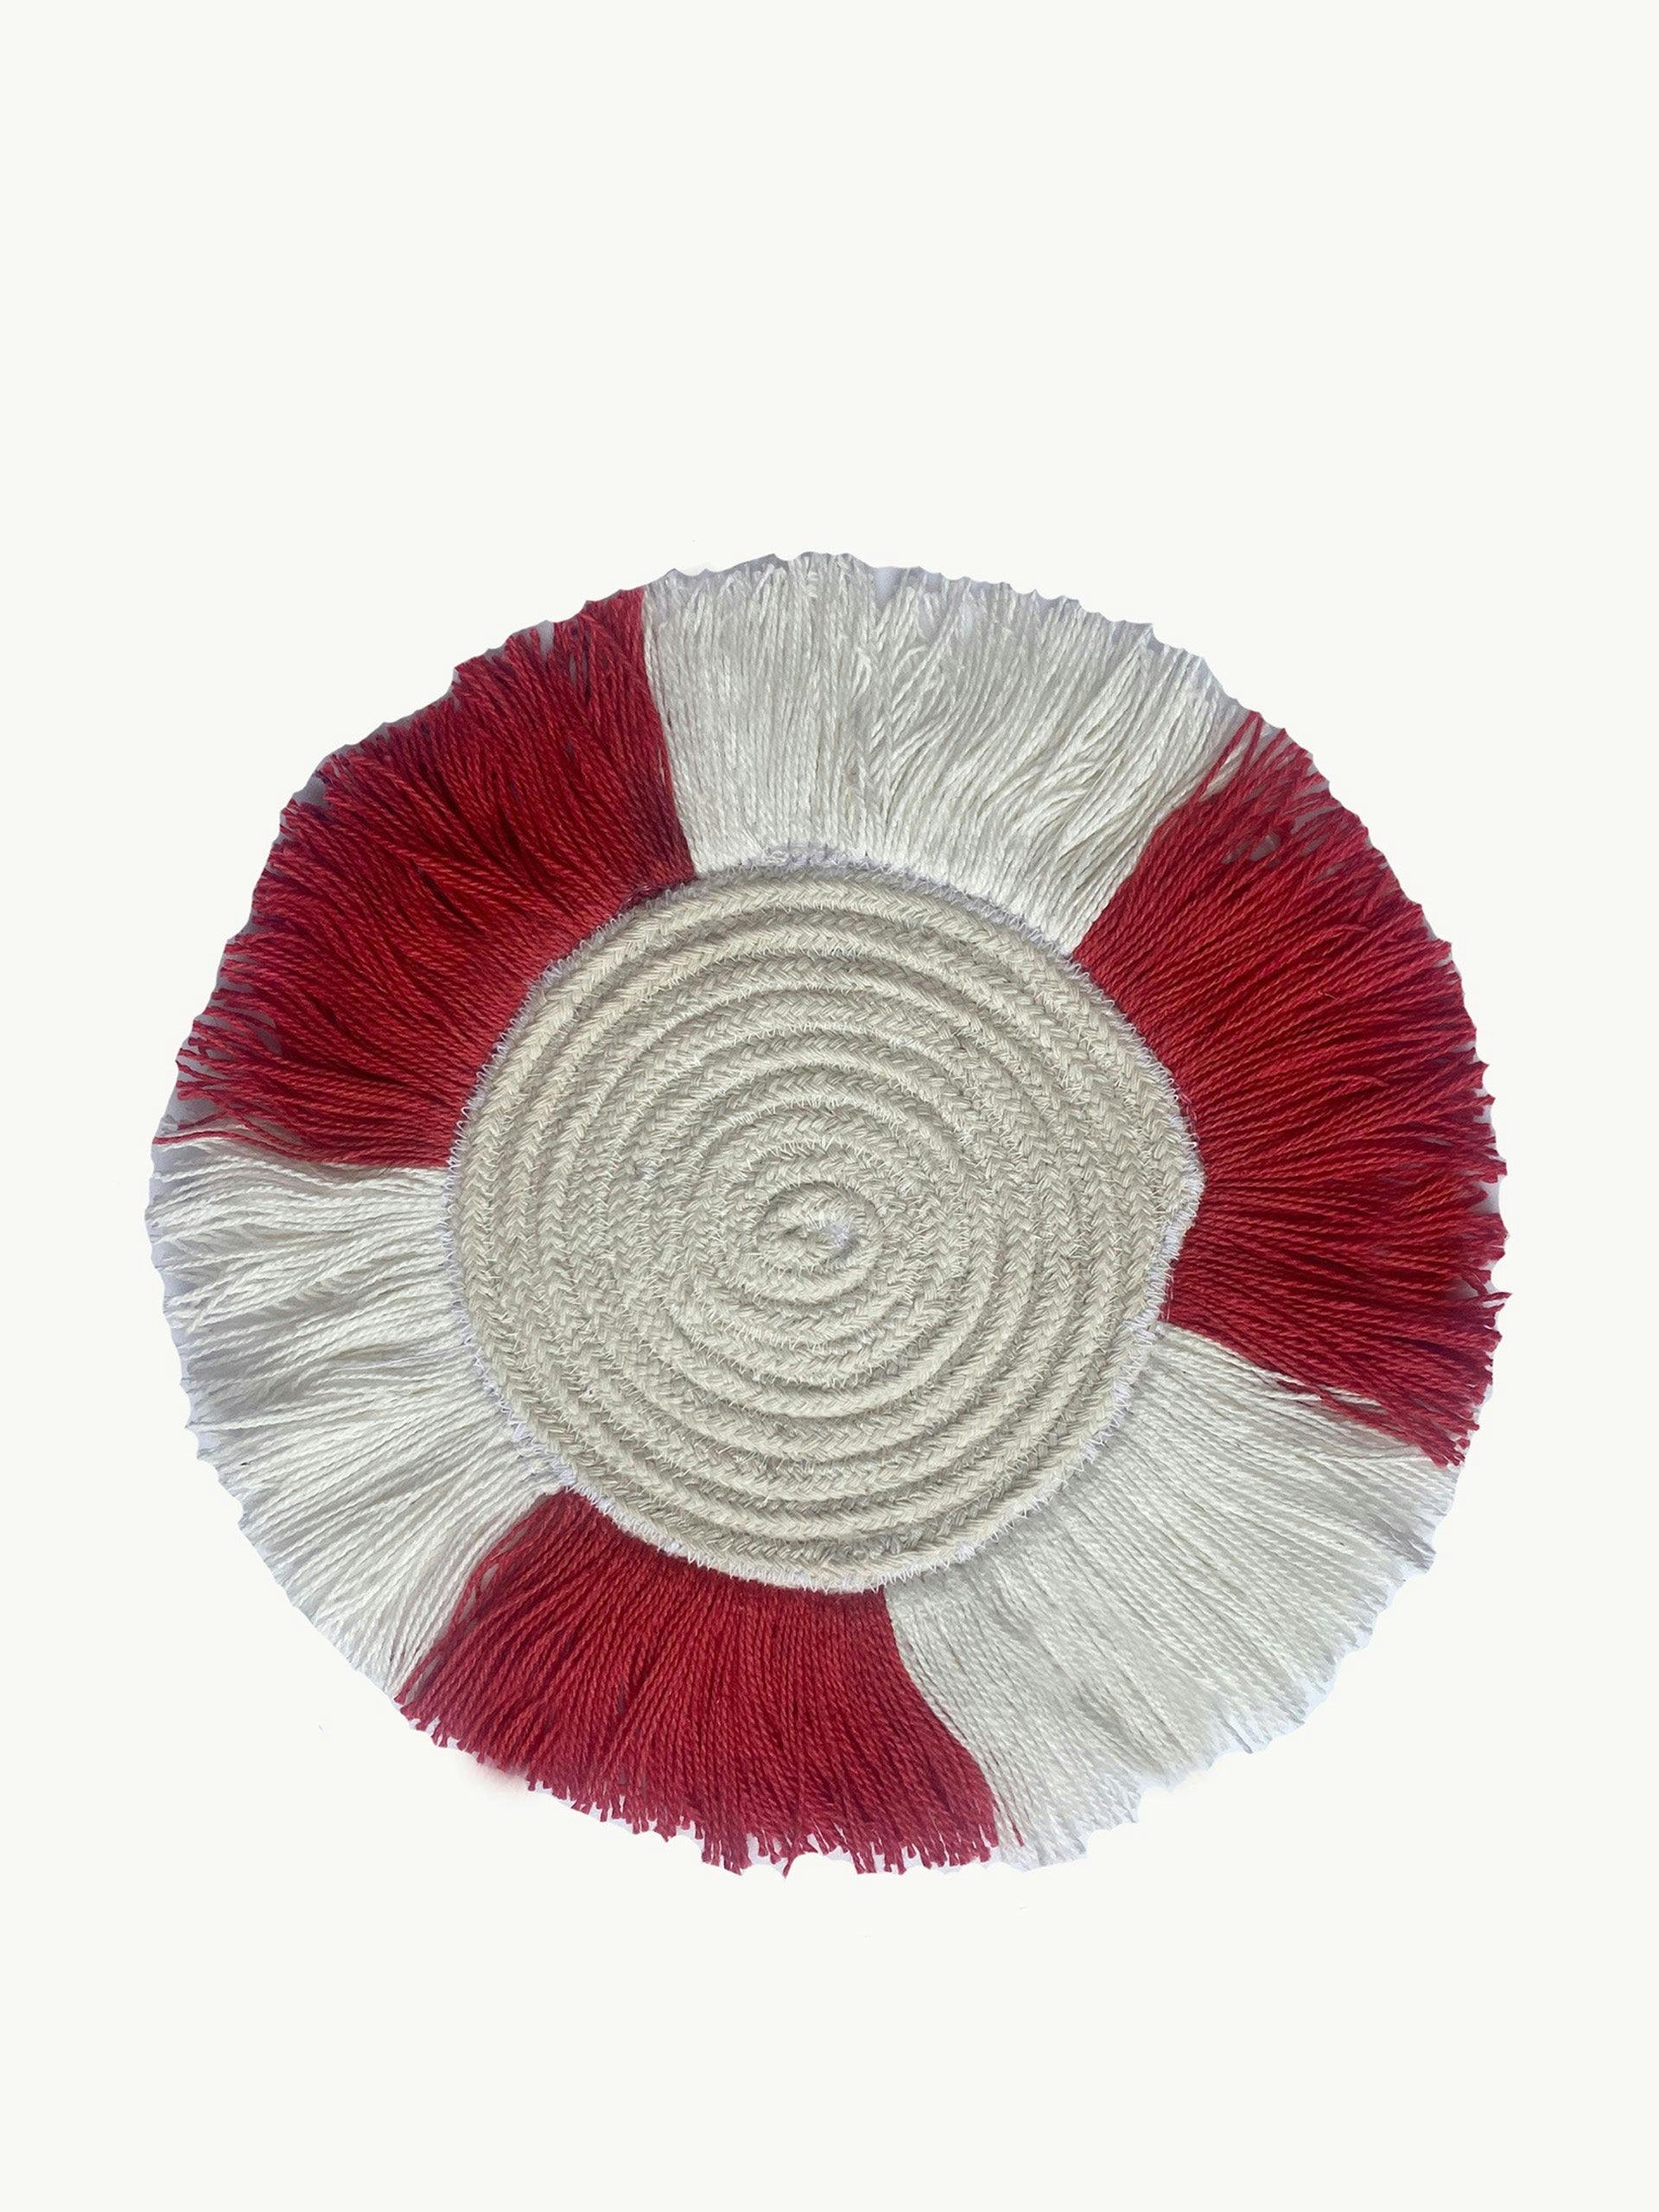 Cherry red fringed coaster